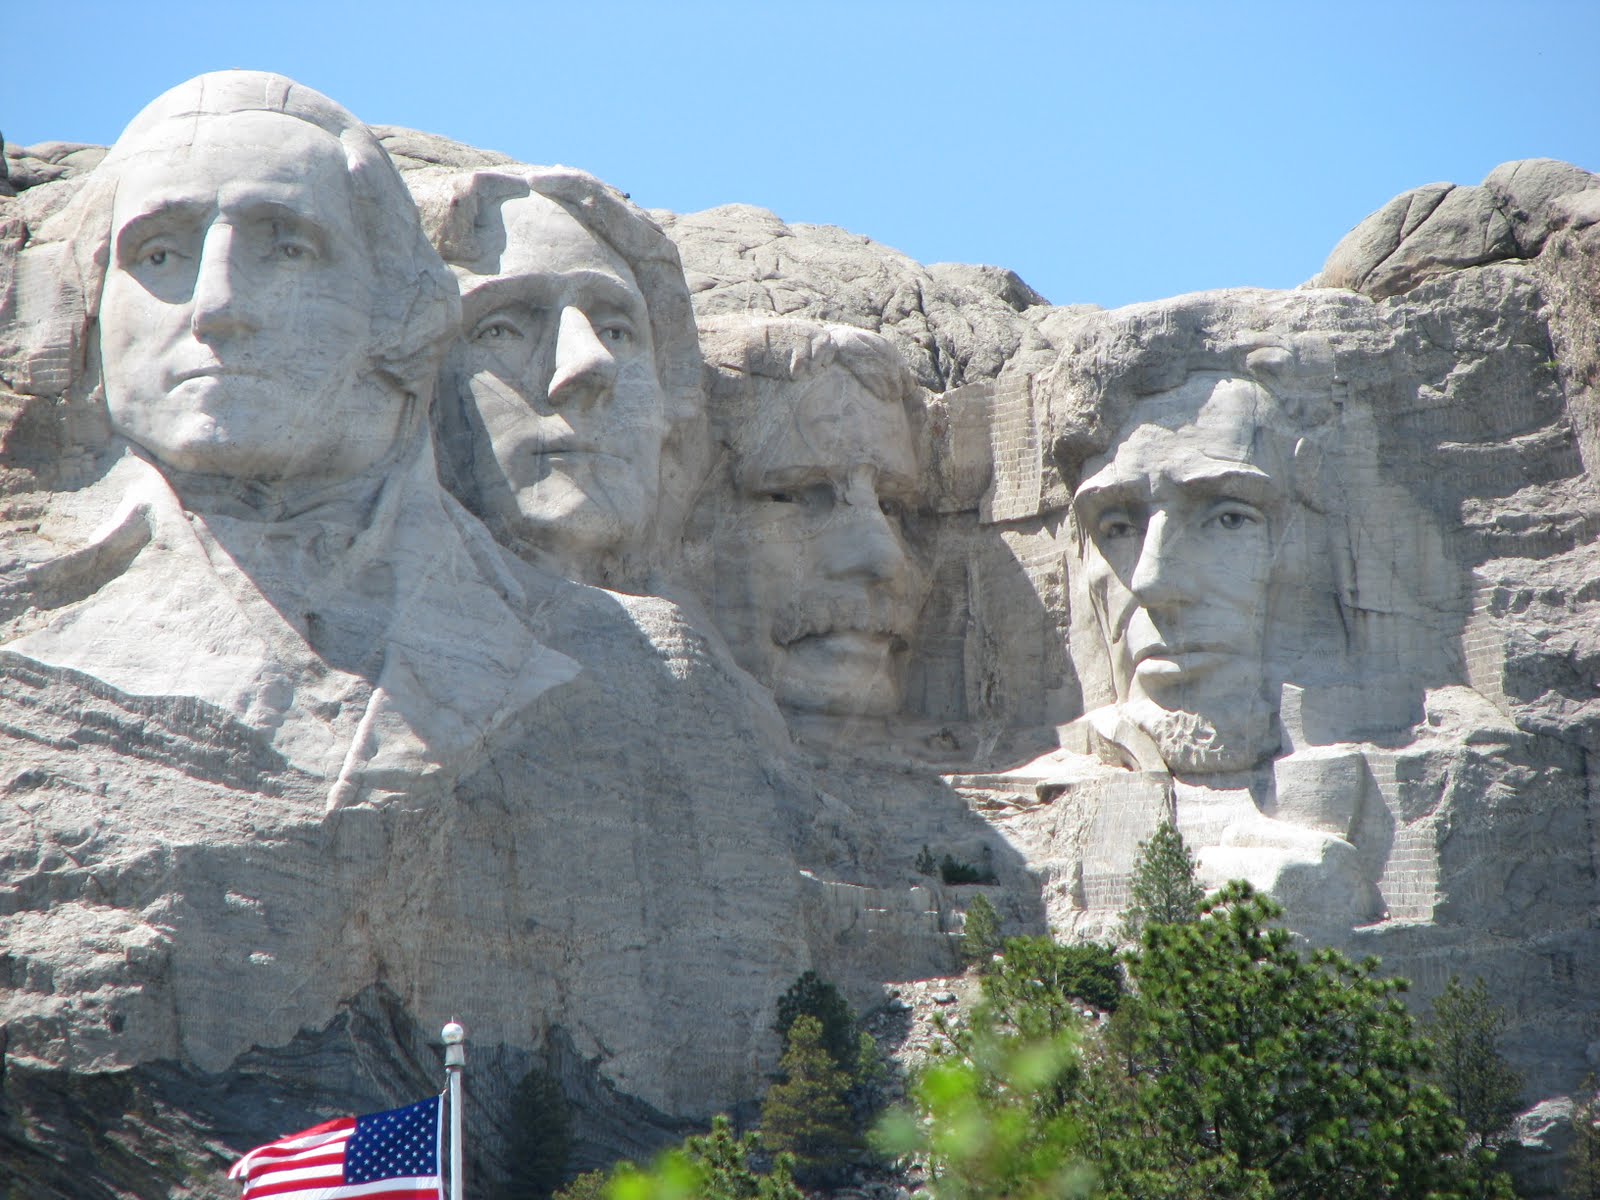 Following Lewis and Clark: Custer State Park and Mount Rushmore